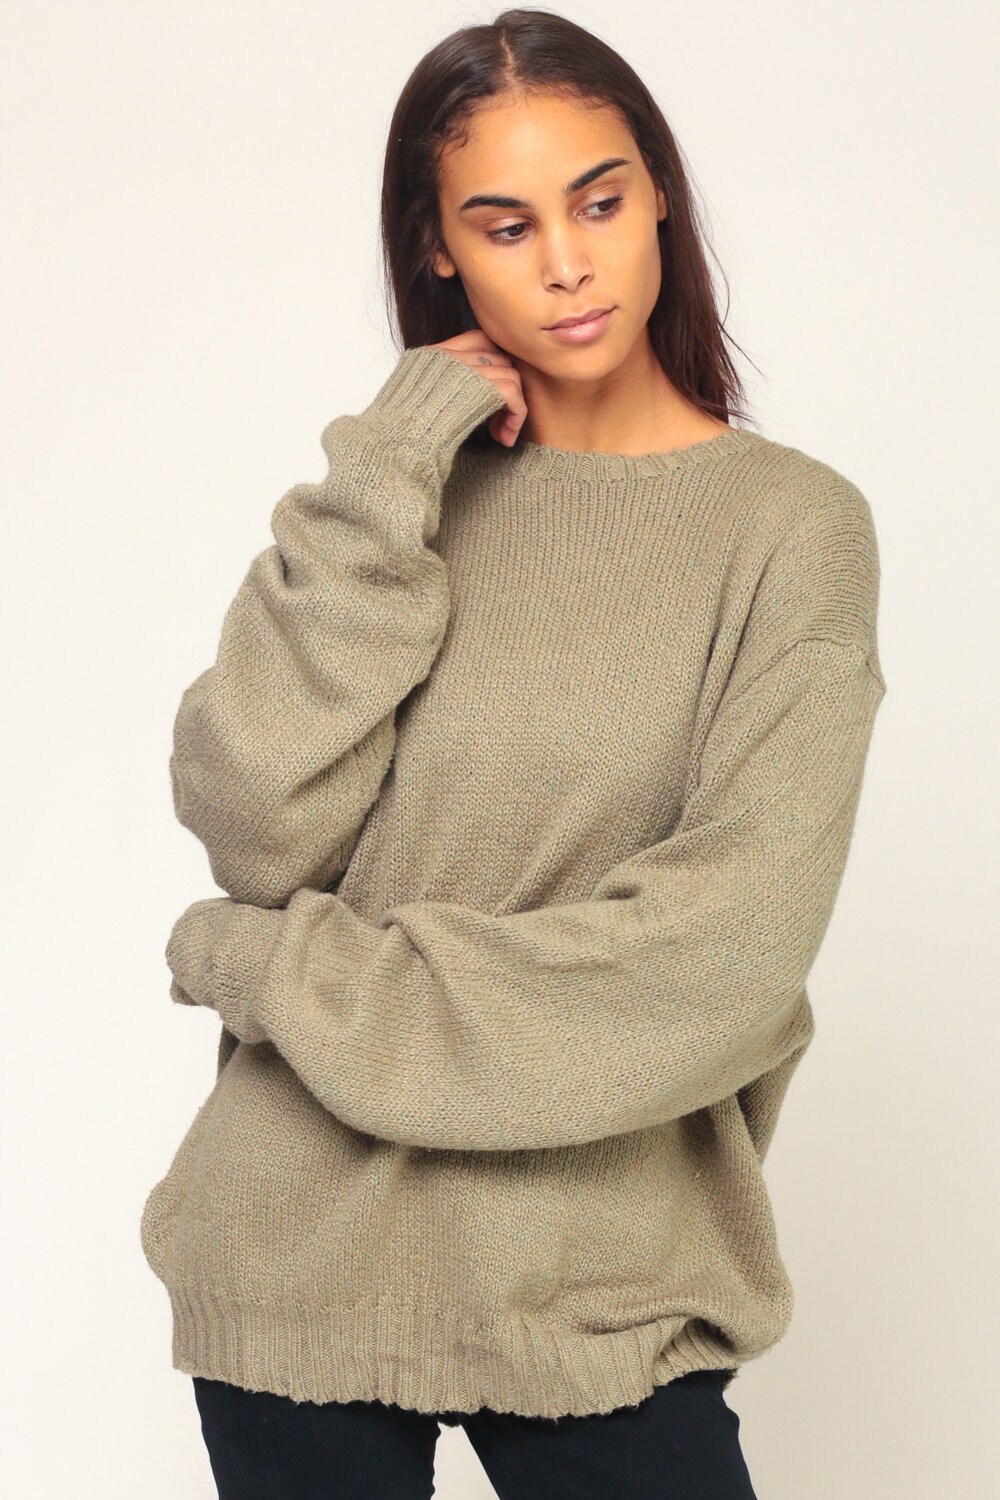 Ralph Lauren Sweater 90s Polo Sport Cotton Knit Taupe Slouchy Preppy ...